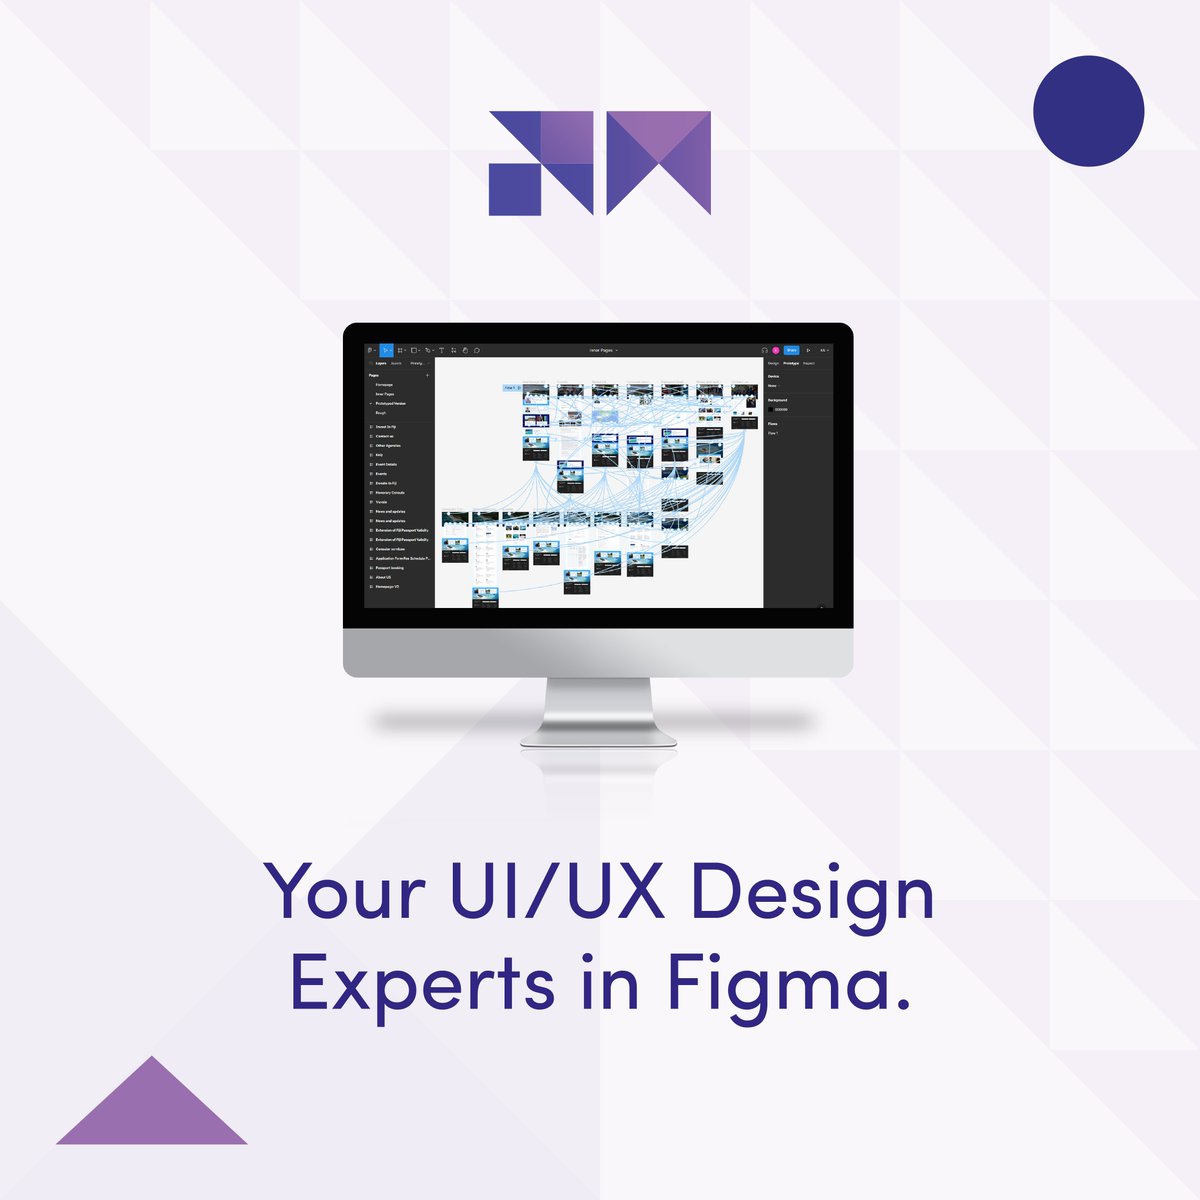 Empower your design journey - collaborate with Planetmedia's Figma UI/UX maestros!

#uidesign #uxdesign #uiux #prototypedesign #figmadesign #webdesign #userexperience #userinterface #planetmedia